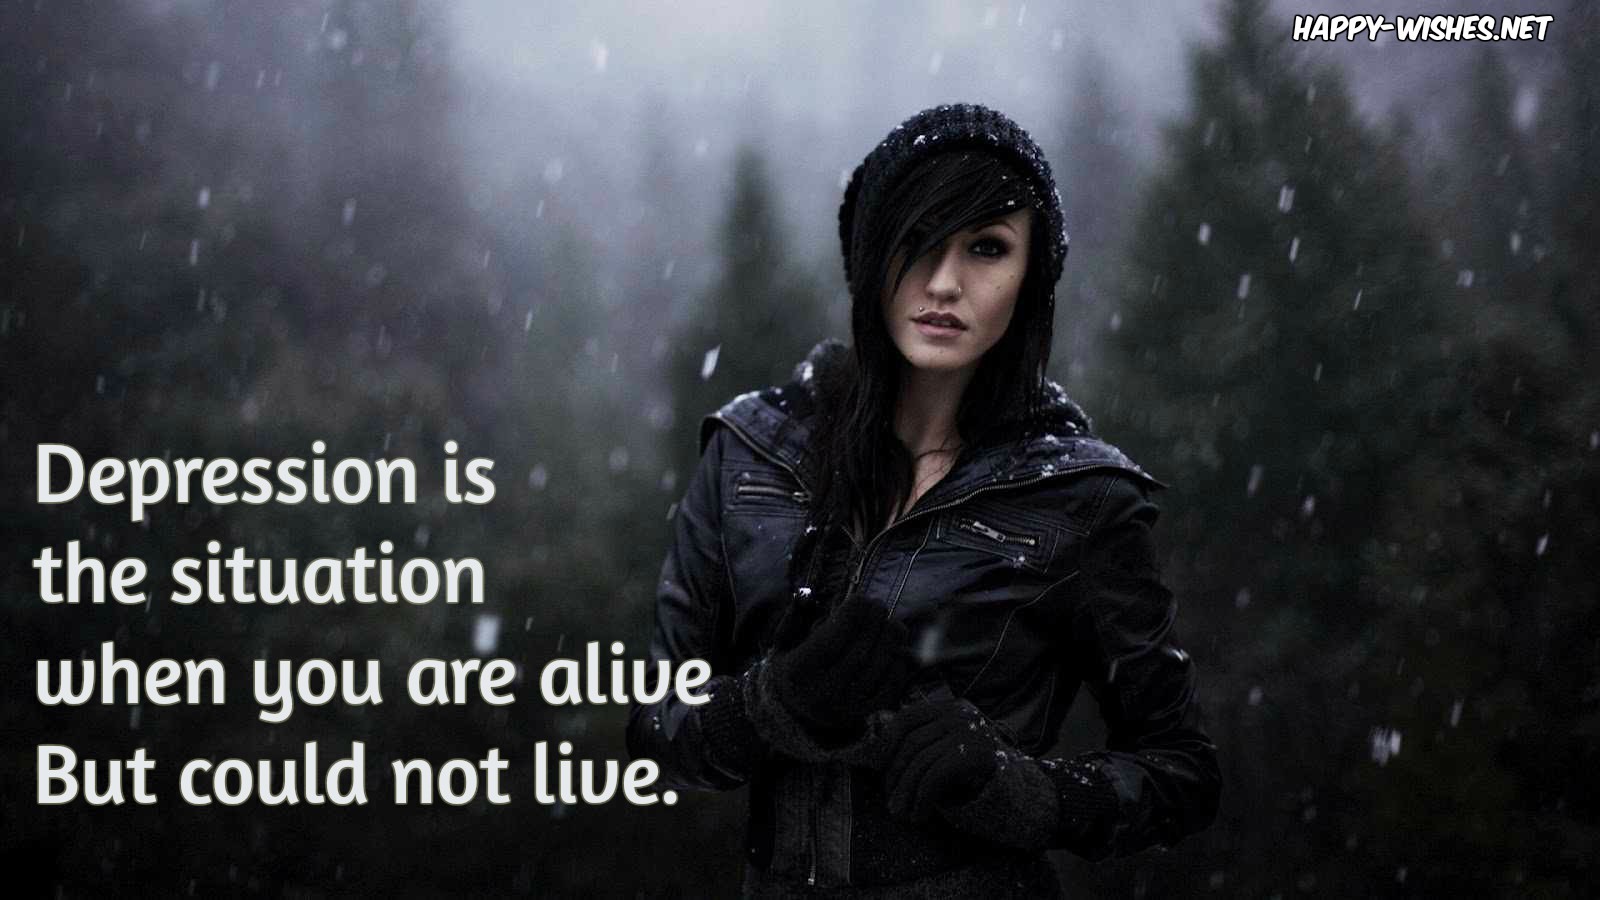 Best Depression Quotes About Life